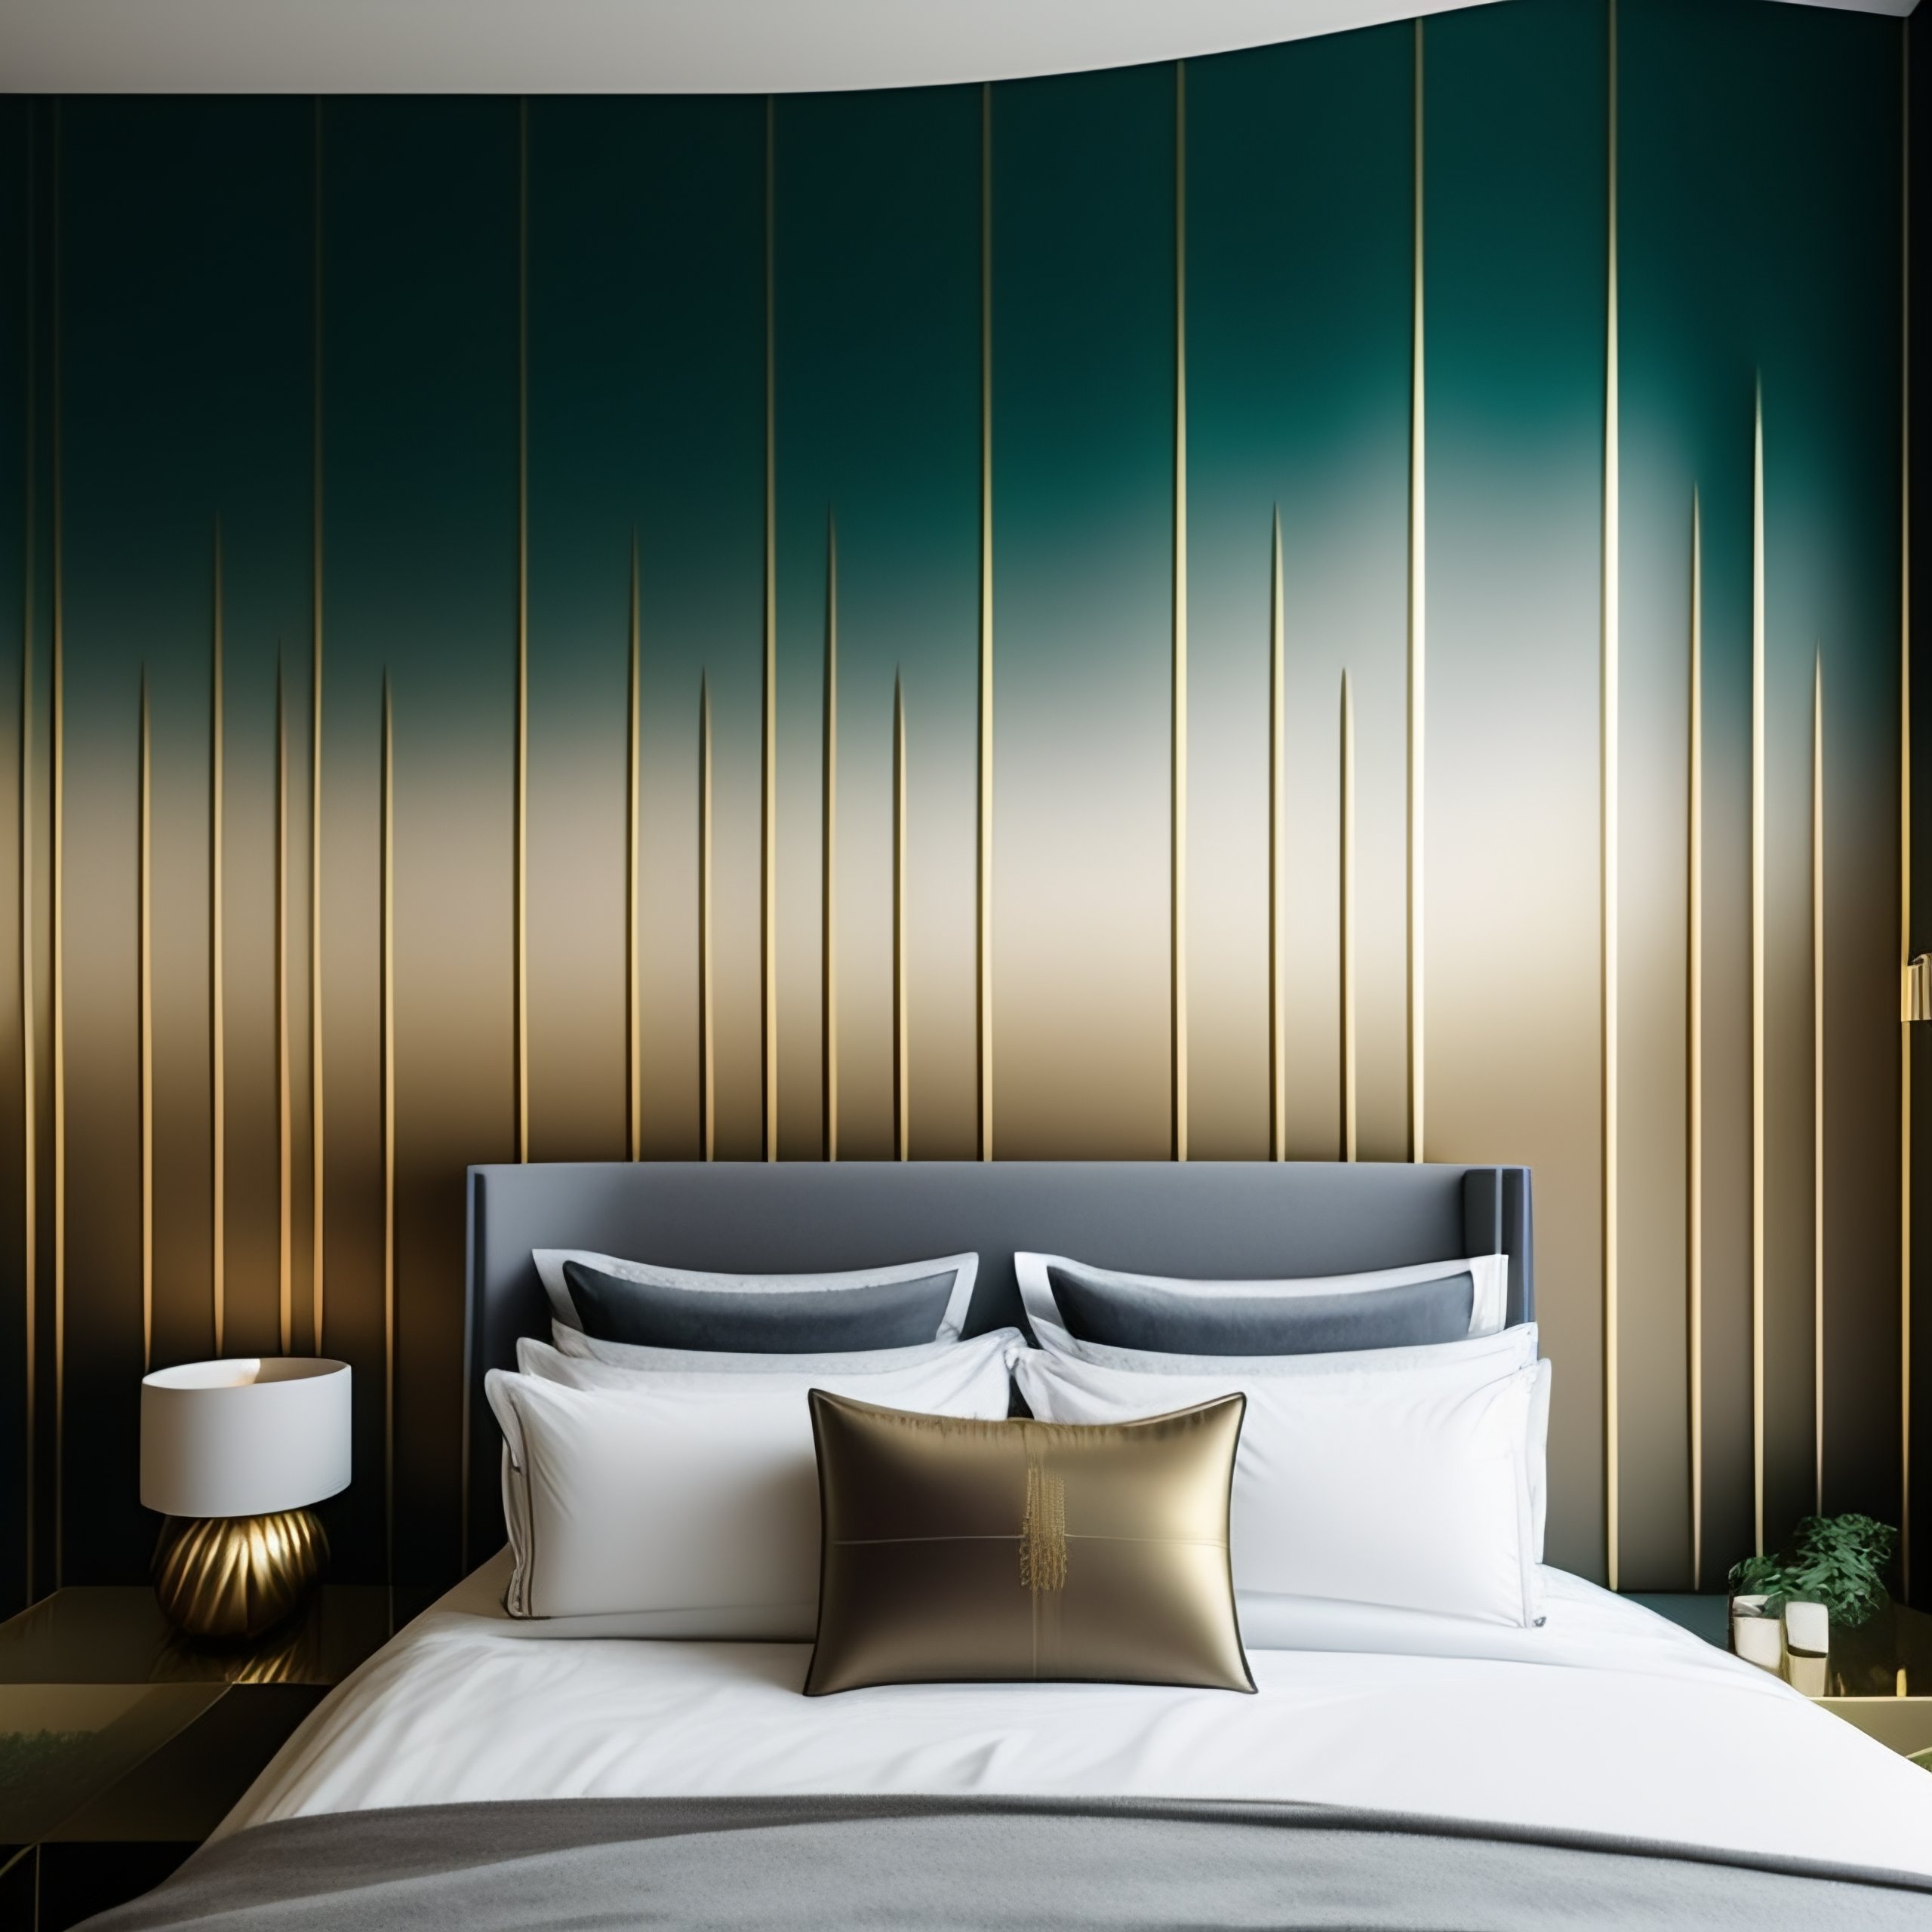 Lexica - Seagreen and golden small bedroom golden tape lines on wall